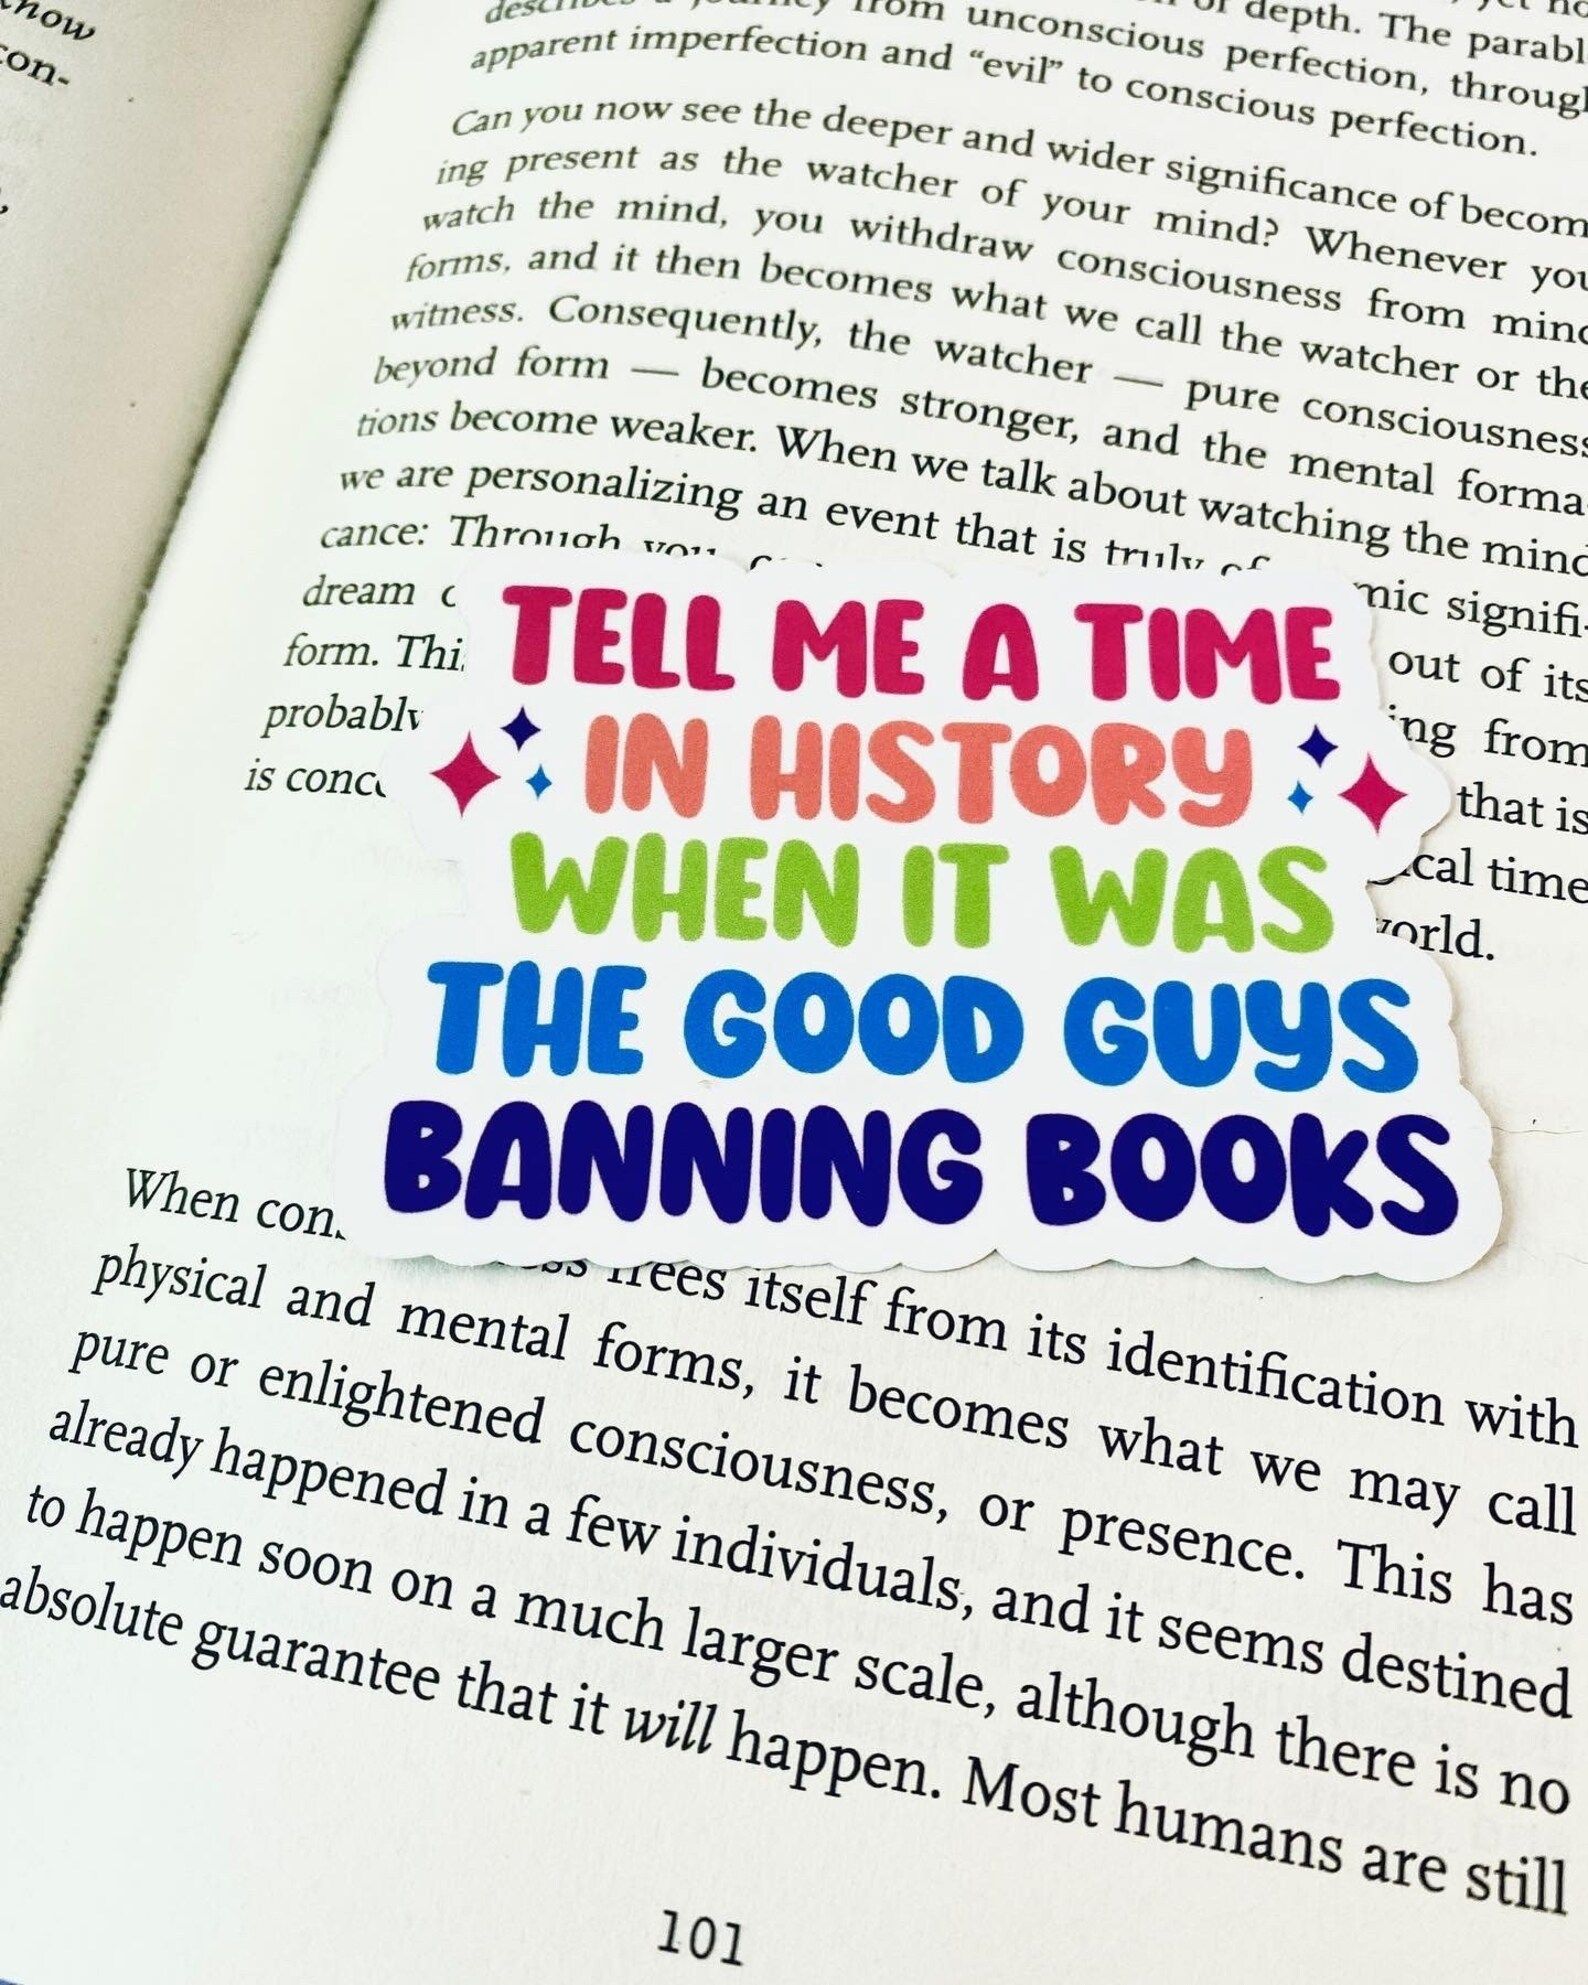 colorful sticker reading "tell me a time in history when it was the good guys banning books."